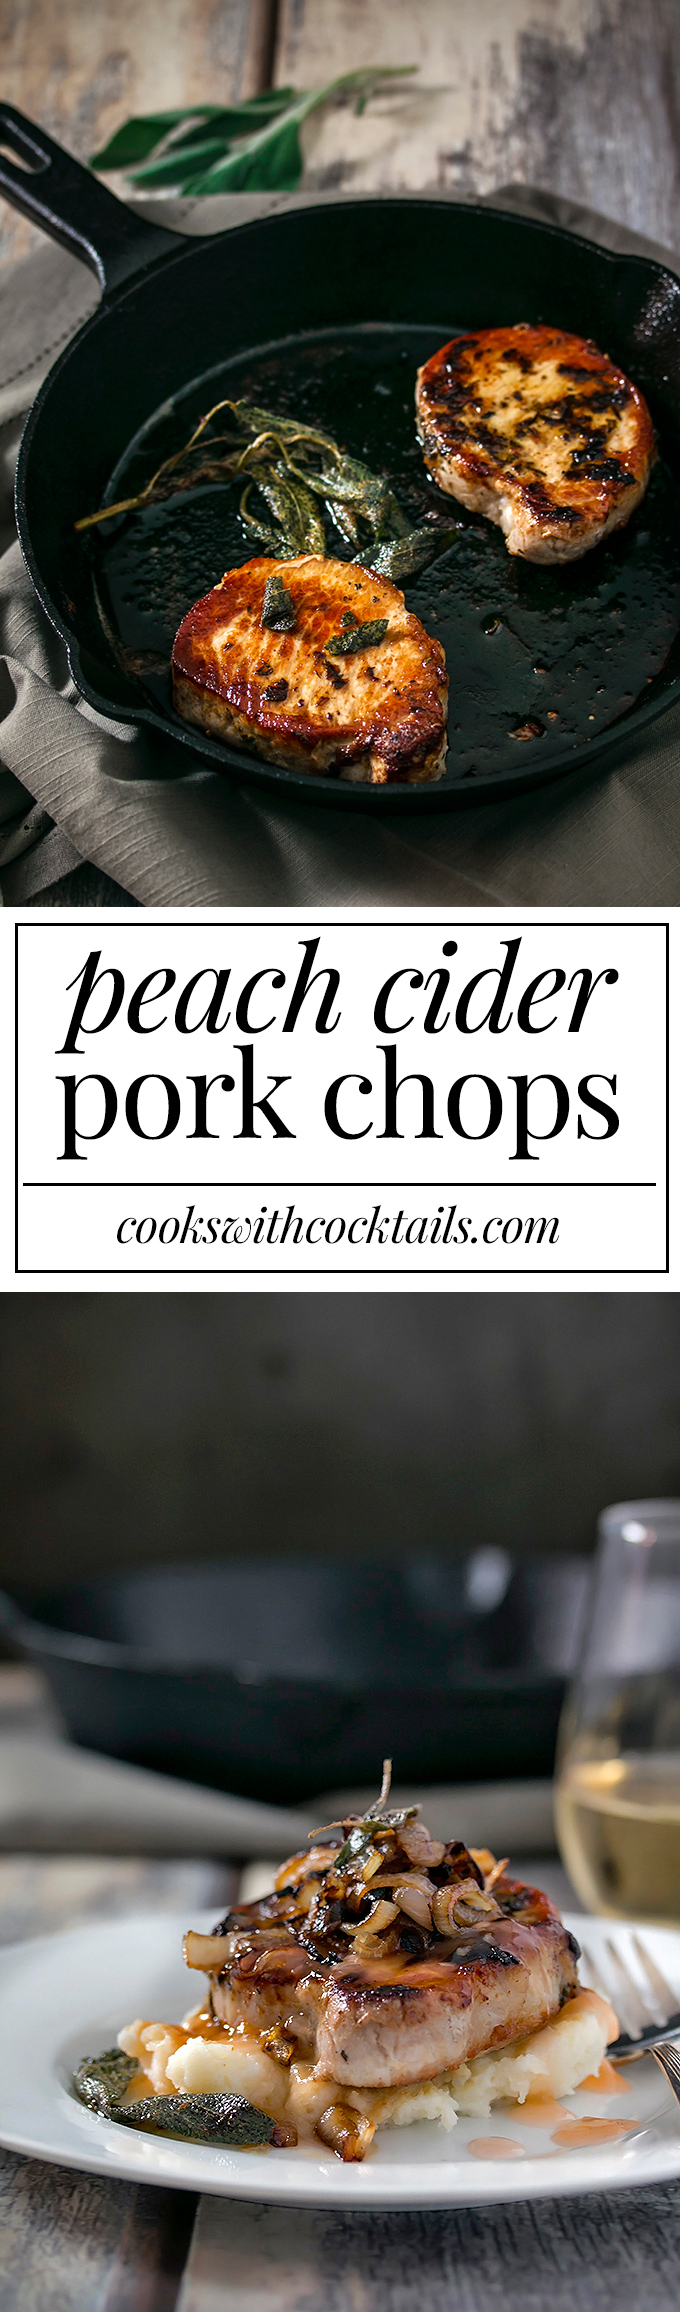 Peach cider, in a sauce form, drizzled all over marinated rosemary pork chops and topped with caramelized onions.